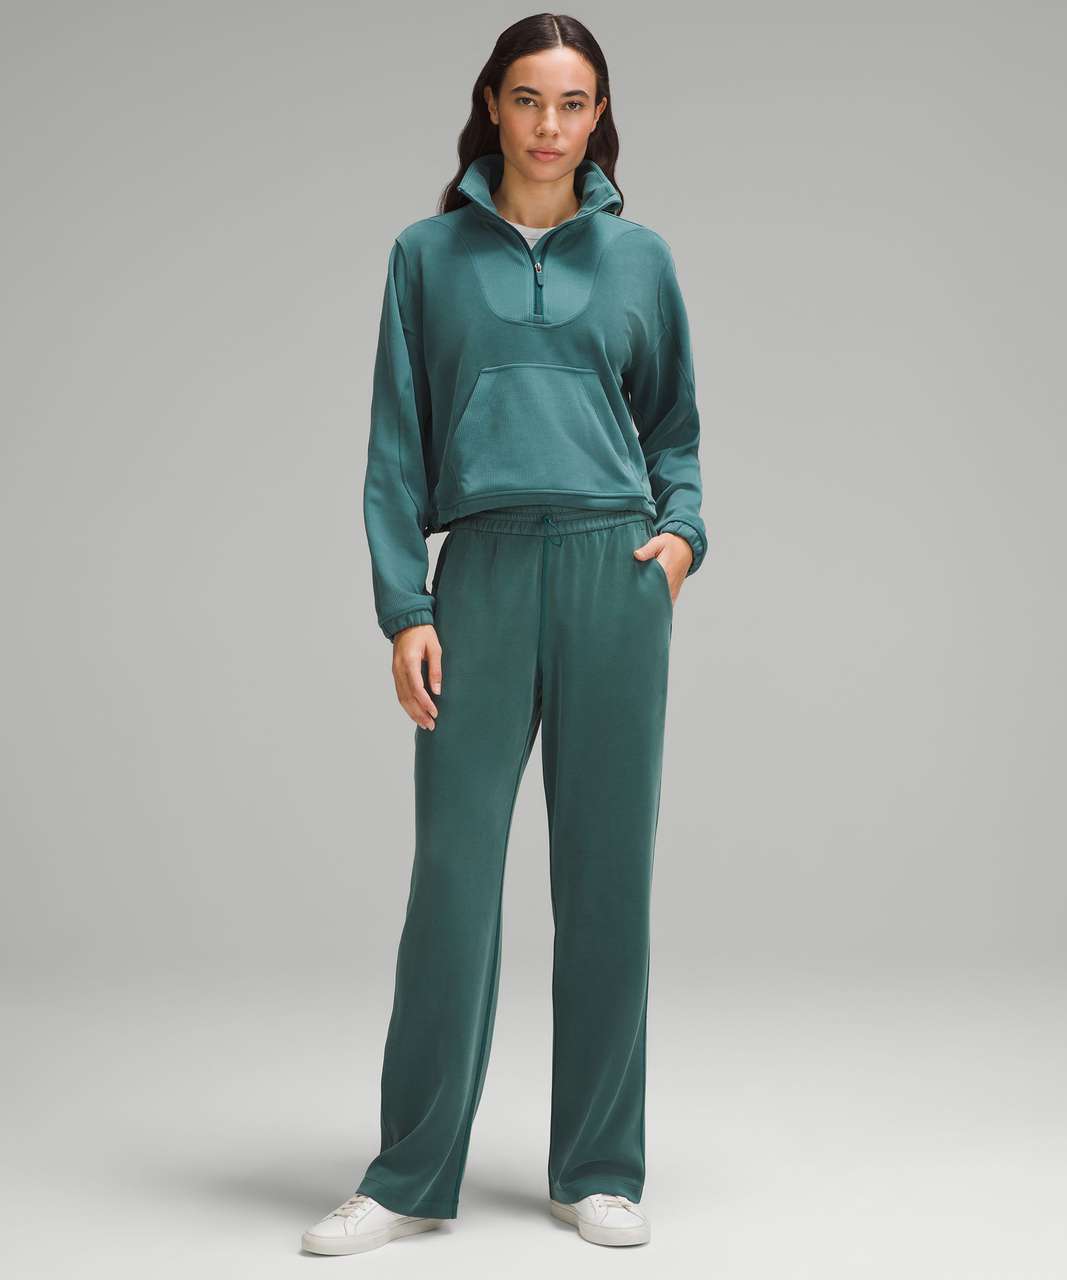 lululemon POCC *softstreme* (Tidewater Teal)  Business casual outfits,  Casual outfits, Clothes design